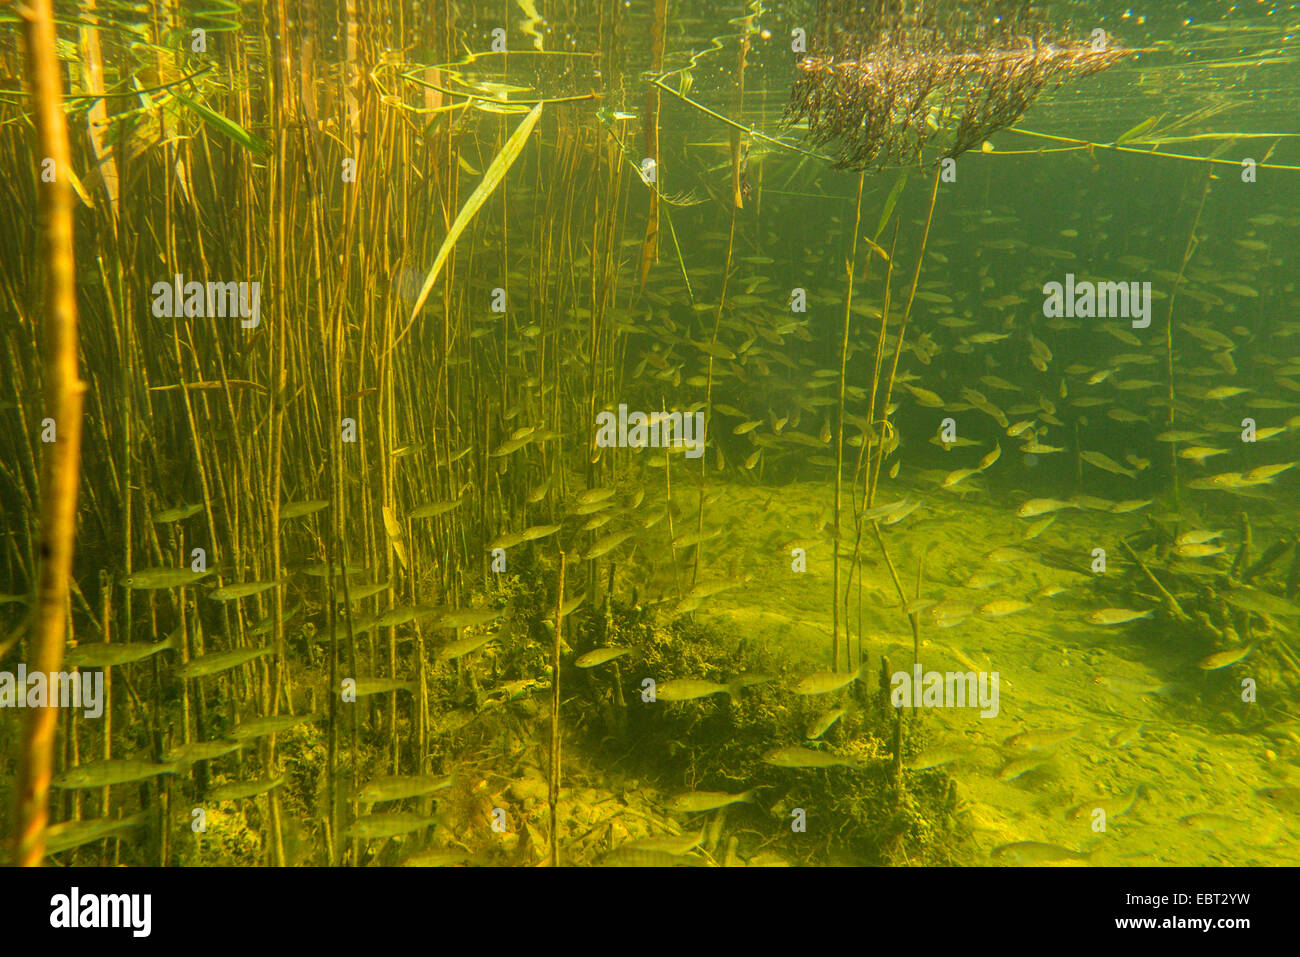 Perch, European perch, Redfin perch (Perca fluviatilis), large school of juvenile perches at the edge of reed zone, Germany, Bavaria, Lake Chiemsee Stock Photo